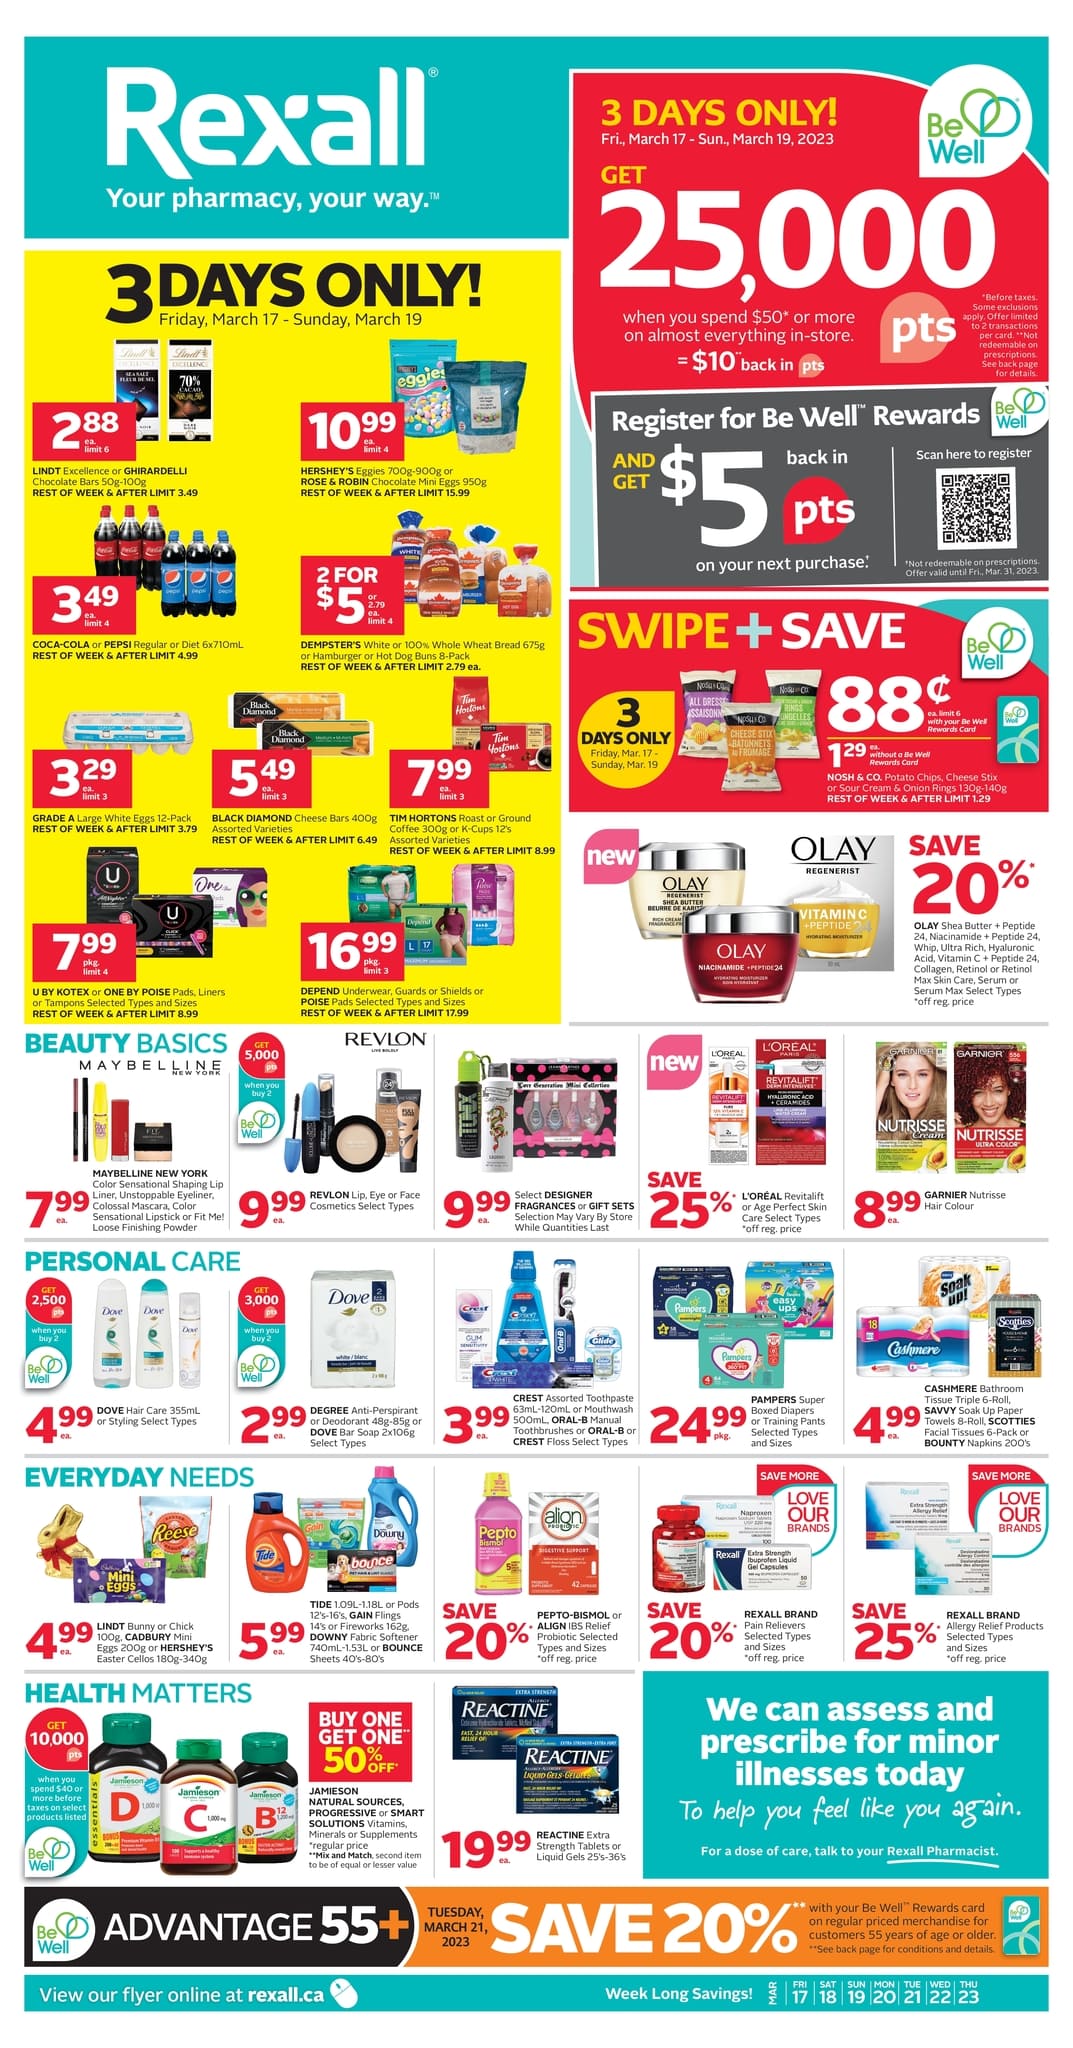 Rexall - Weekly Flyer Specials - Page 1